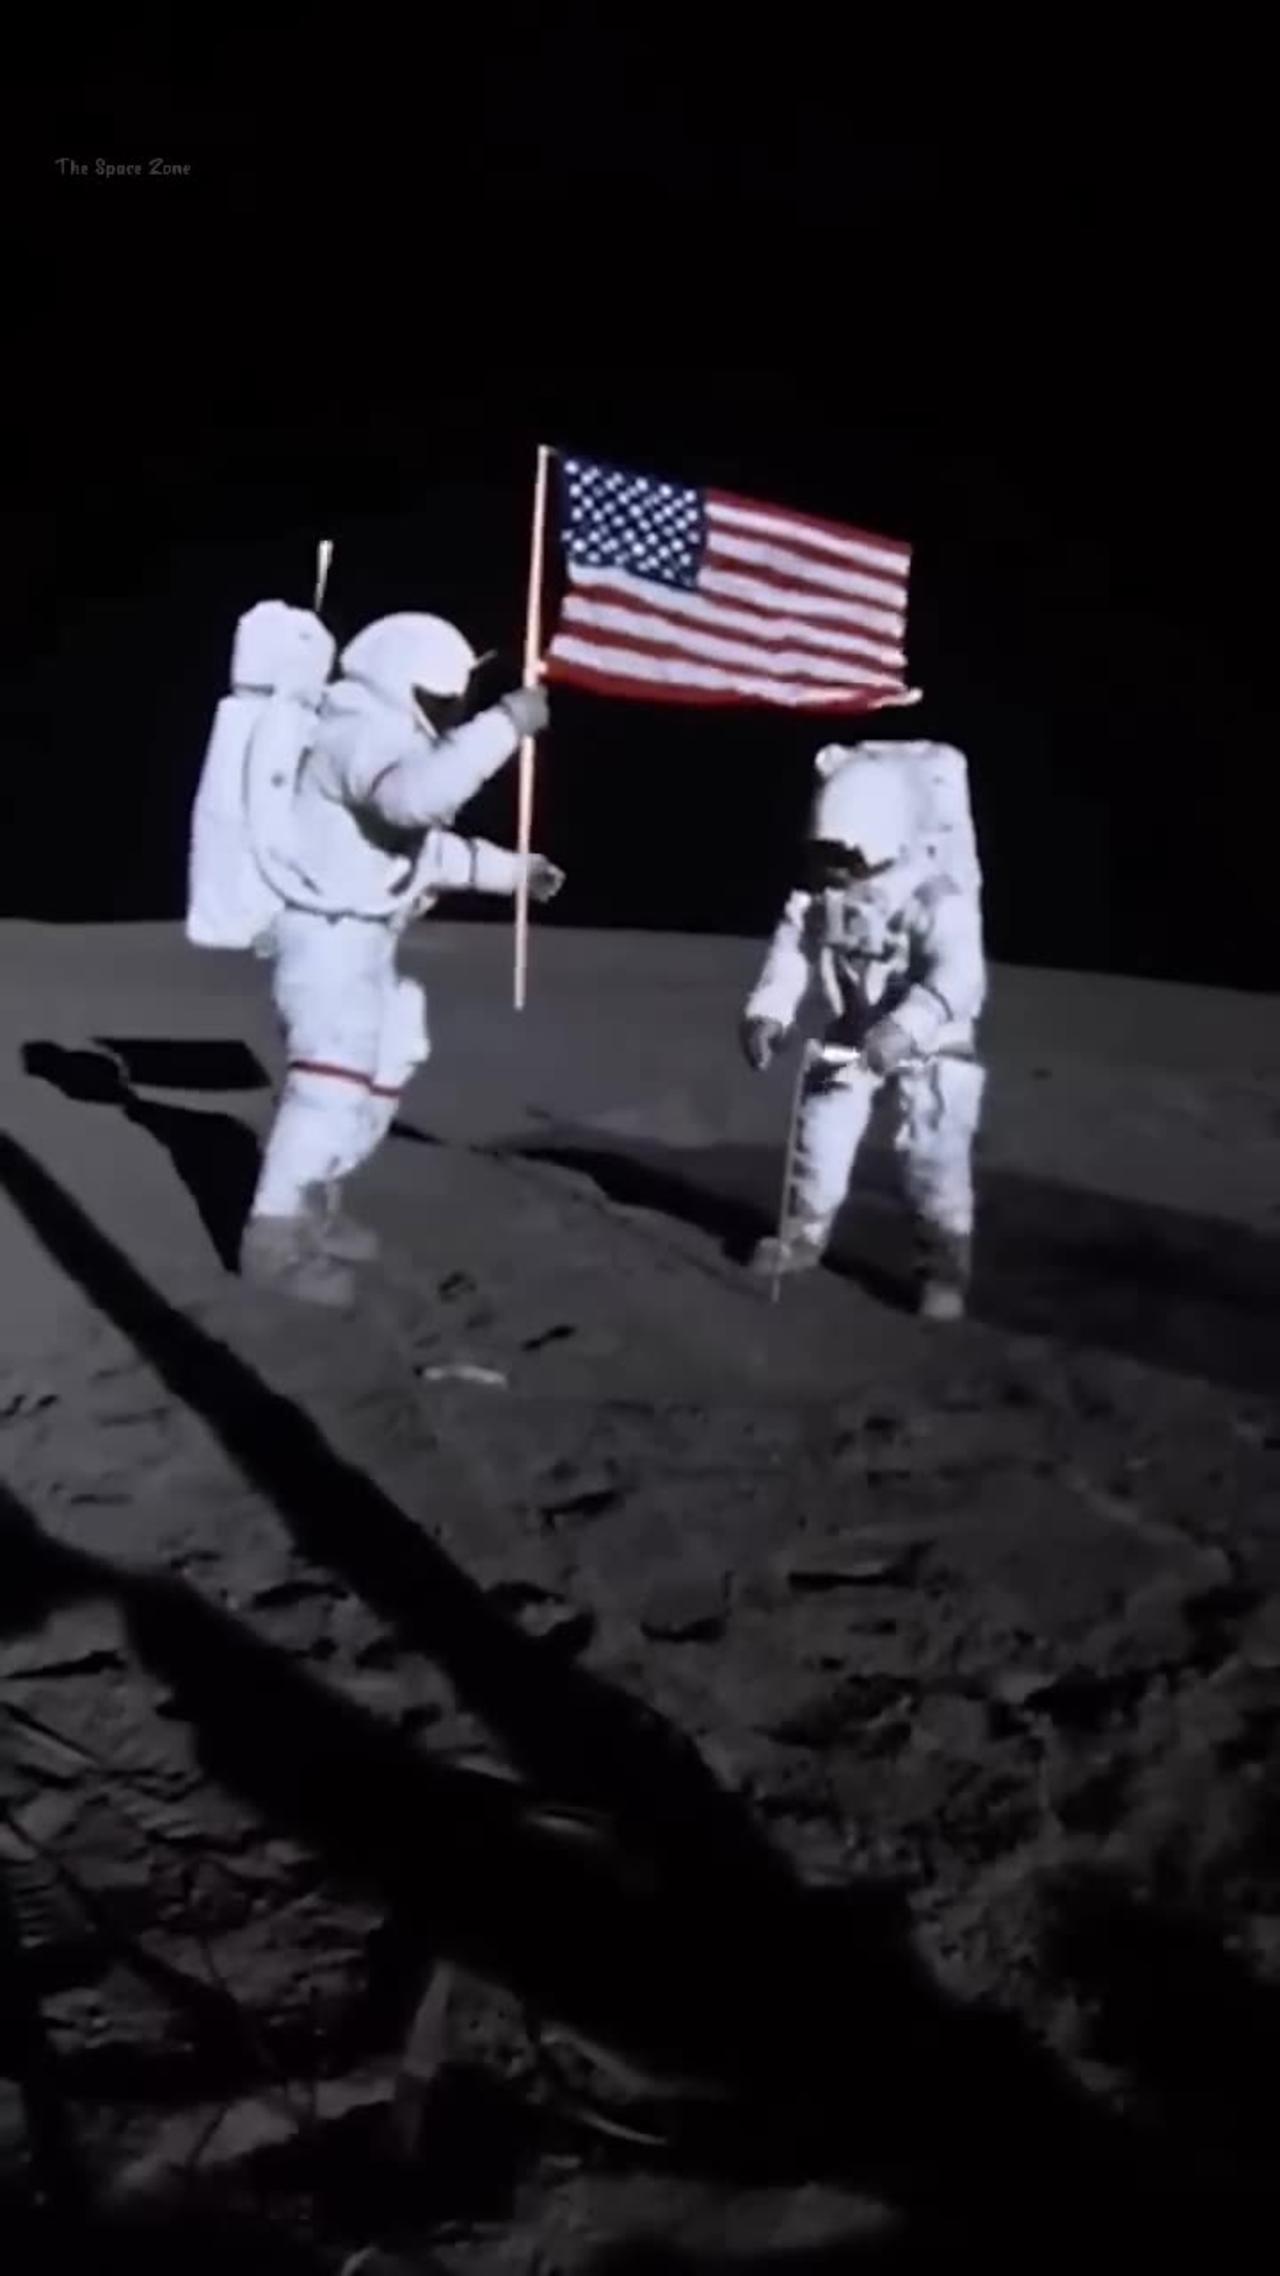 Neil Armstrong's Moon landing video